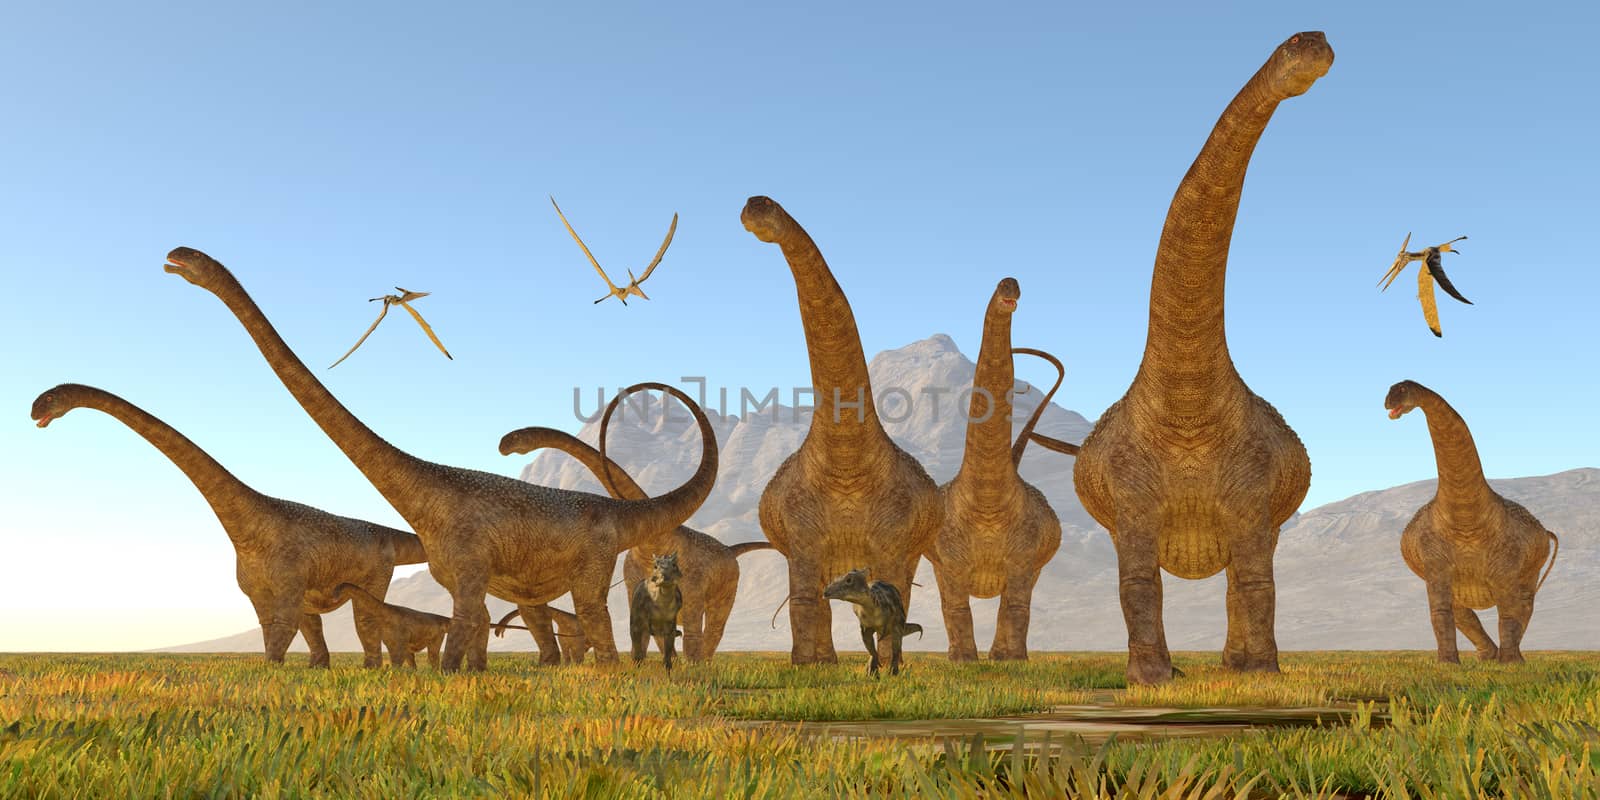 Two Dracorex walk with a herd of Malawisaurus dinosaurs for safety as a flock of Pteranodon reptiles fly over.